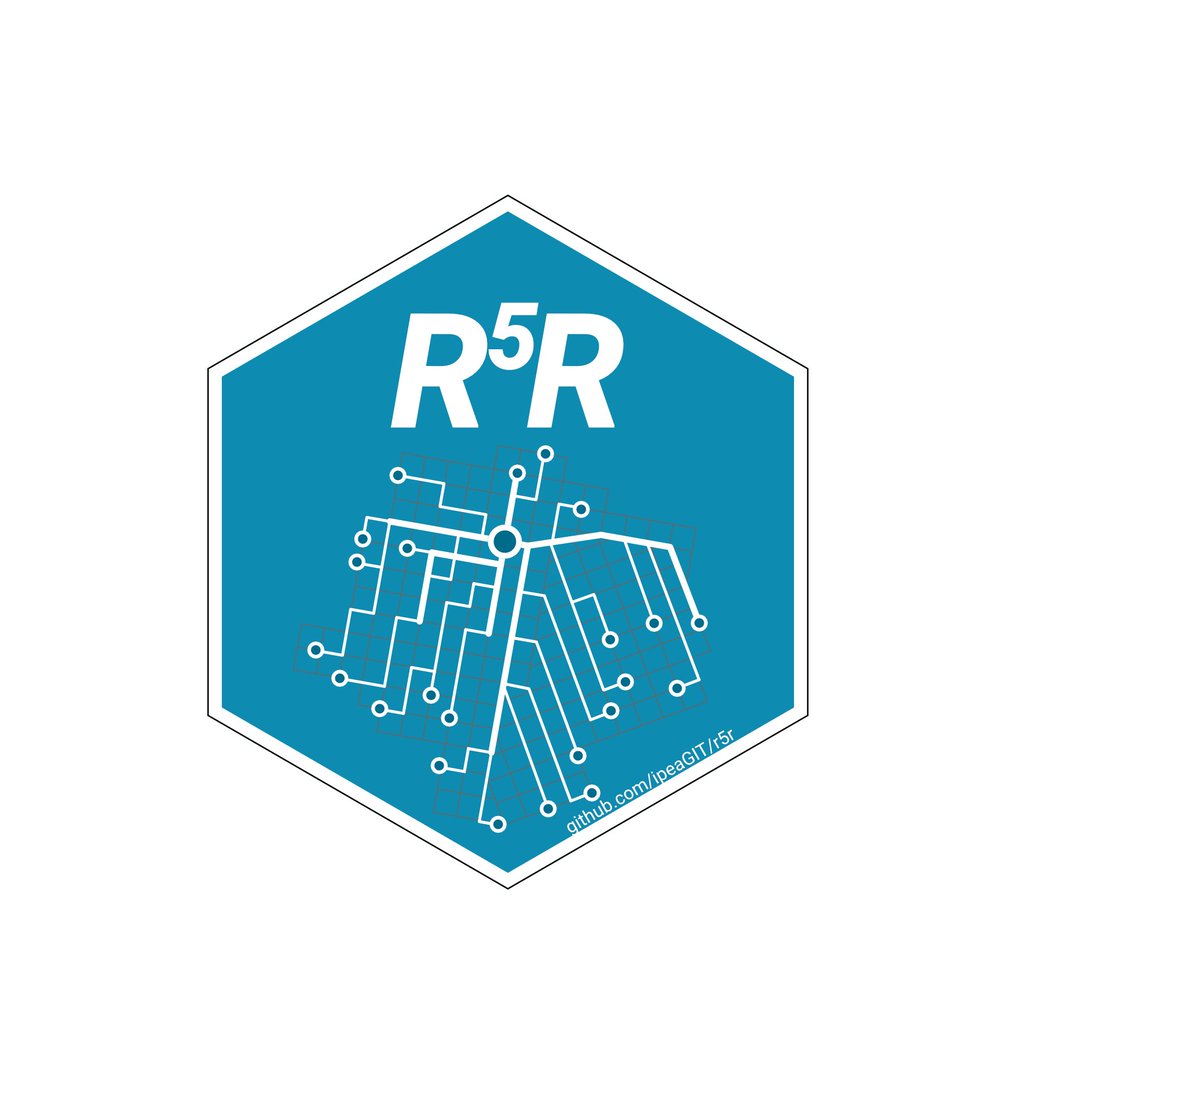 The r5r now has a sticker and a website where you can read an intro vignettes showing how the package works  https://ipeagit.github.io/r5r/  Proud of this incredible team  @mvpsaraiva  @dhersz and  @ckauebraga for such a speedy package. We created  #r5rstats in less then a month